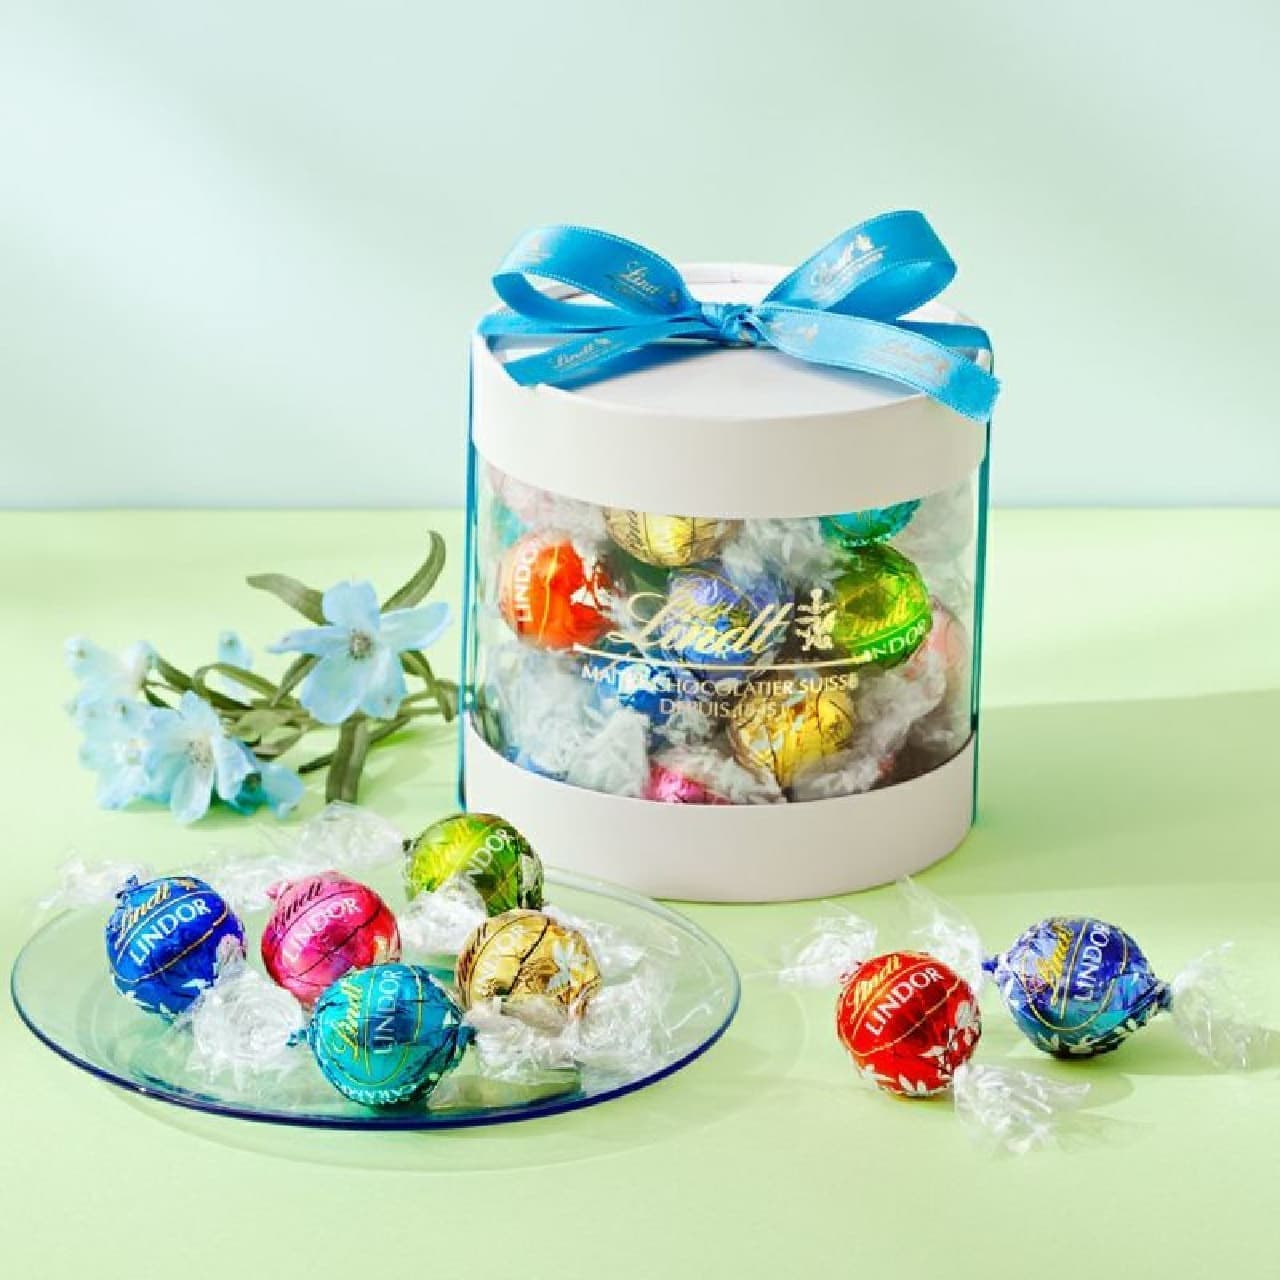 Lindt] The perfect gift for early summer! Refreshing Chocolate Gift Special